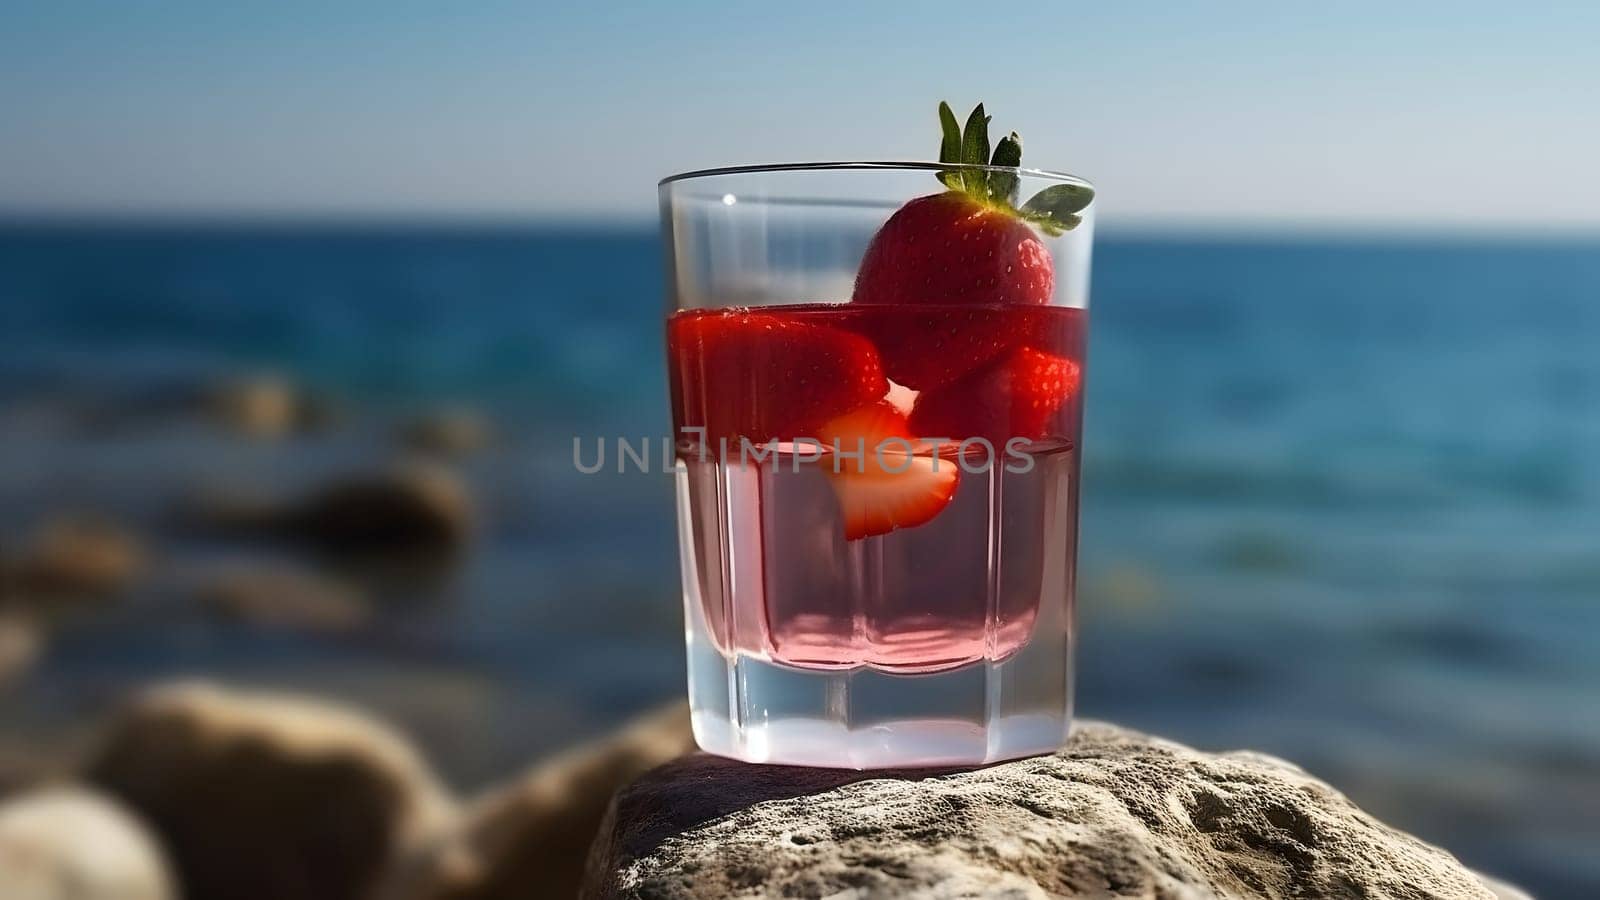 A glass of strawberries cold refreshing drink on sea background at sunny summer day, neural network generated image by z1b